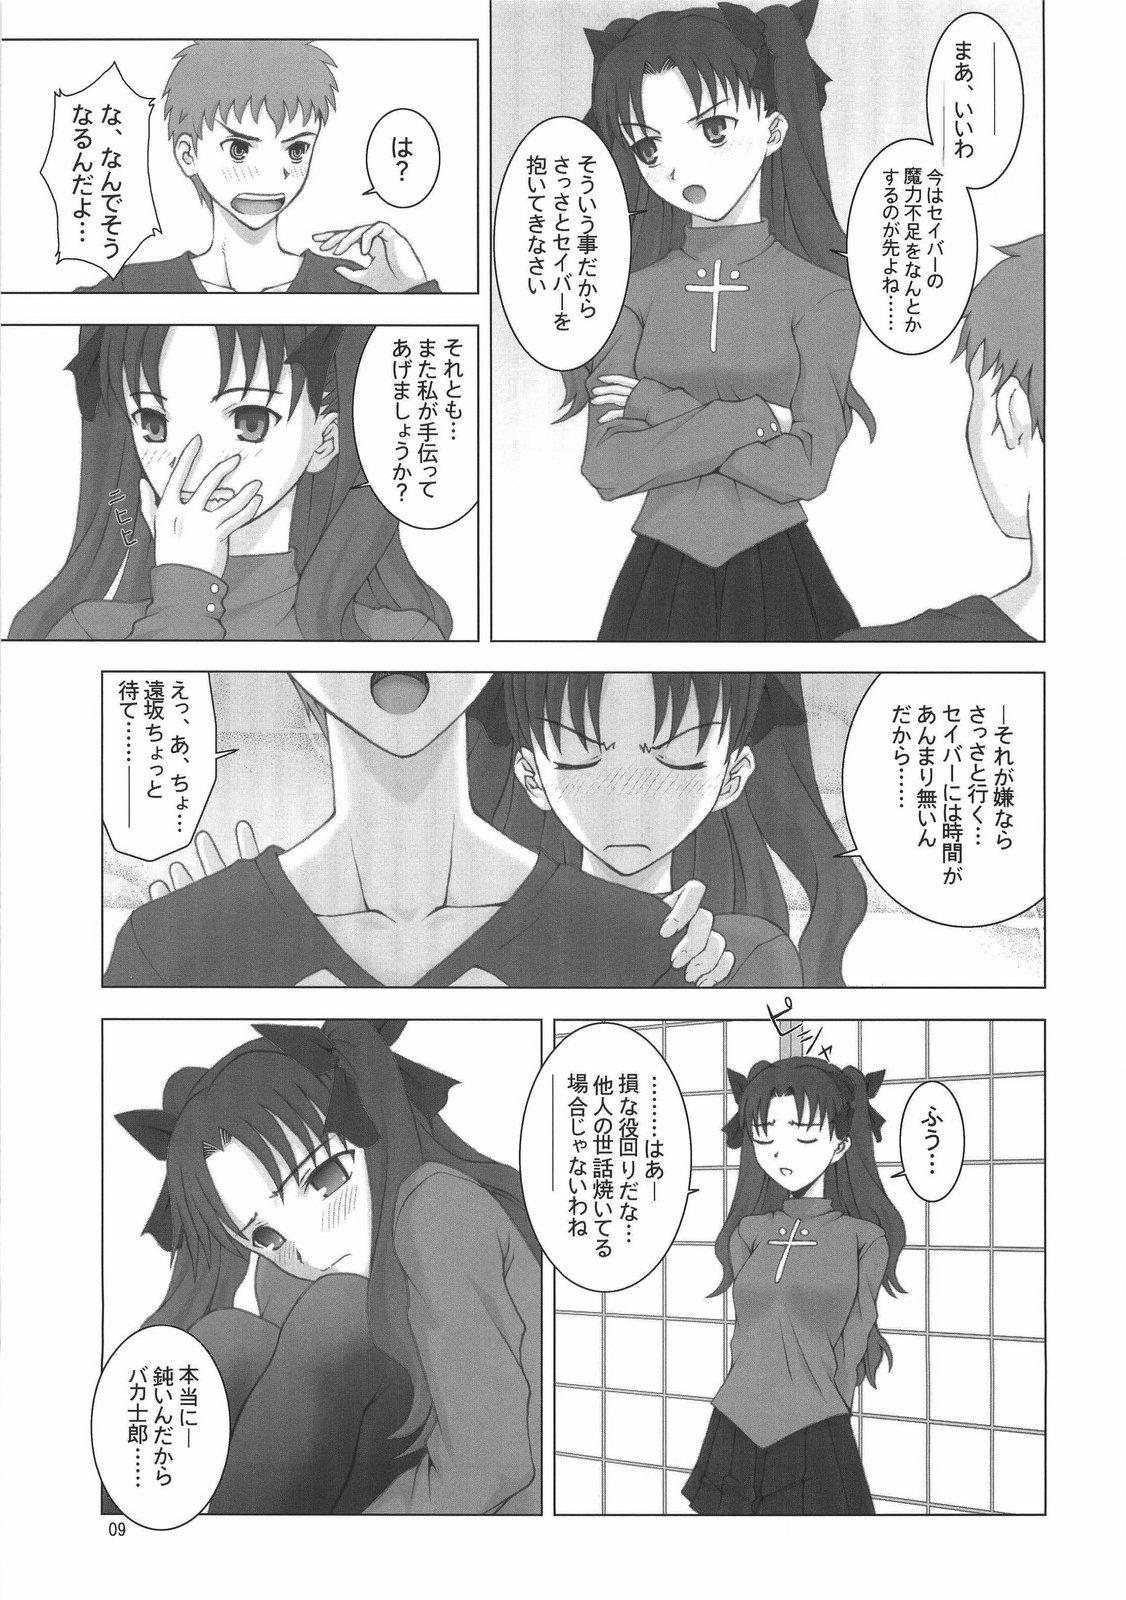 Dancing R25 Vol.9 Unlimited/fotune - Fate stay night Sloppy Blow Job - Page 8